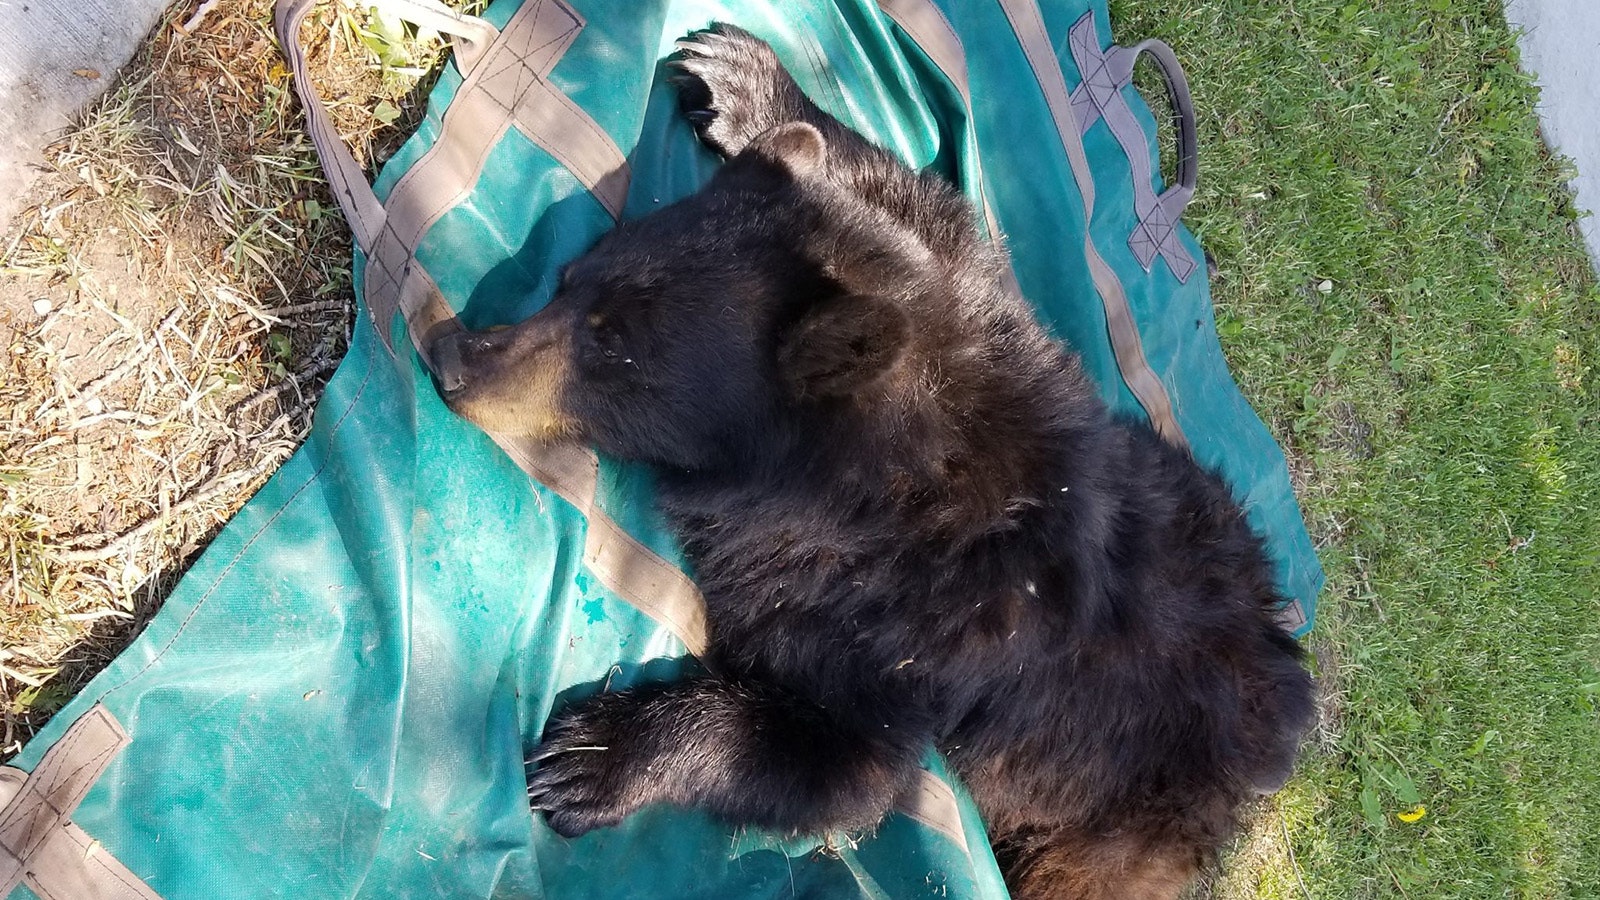 Bears have been showing up in Sheridan with greater frequency, but a wildlife official says it's part of a region-wide problem.